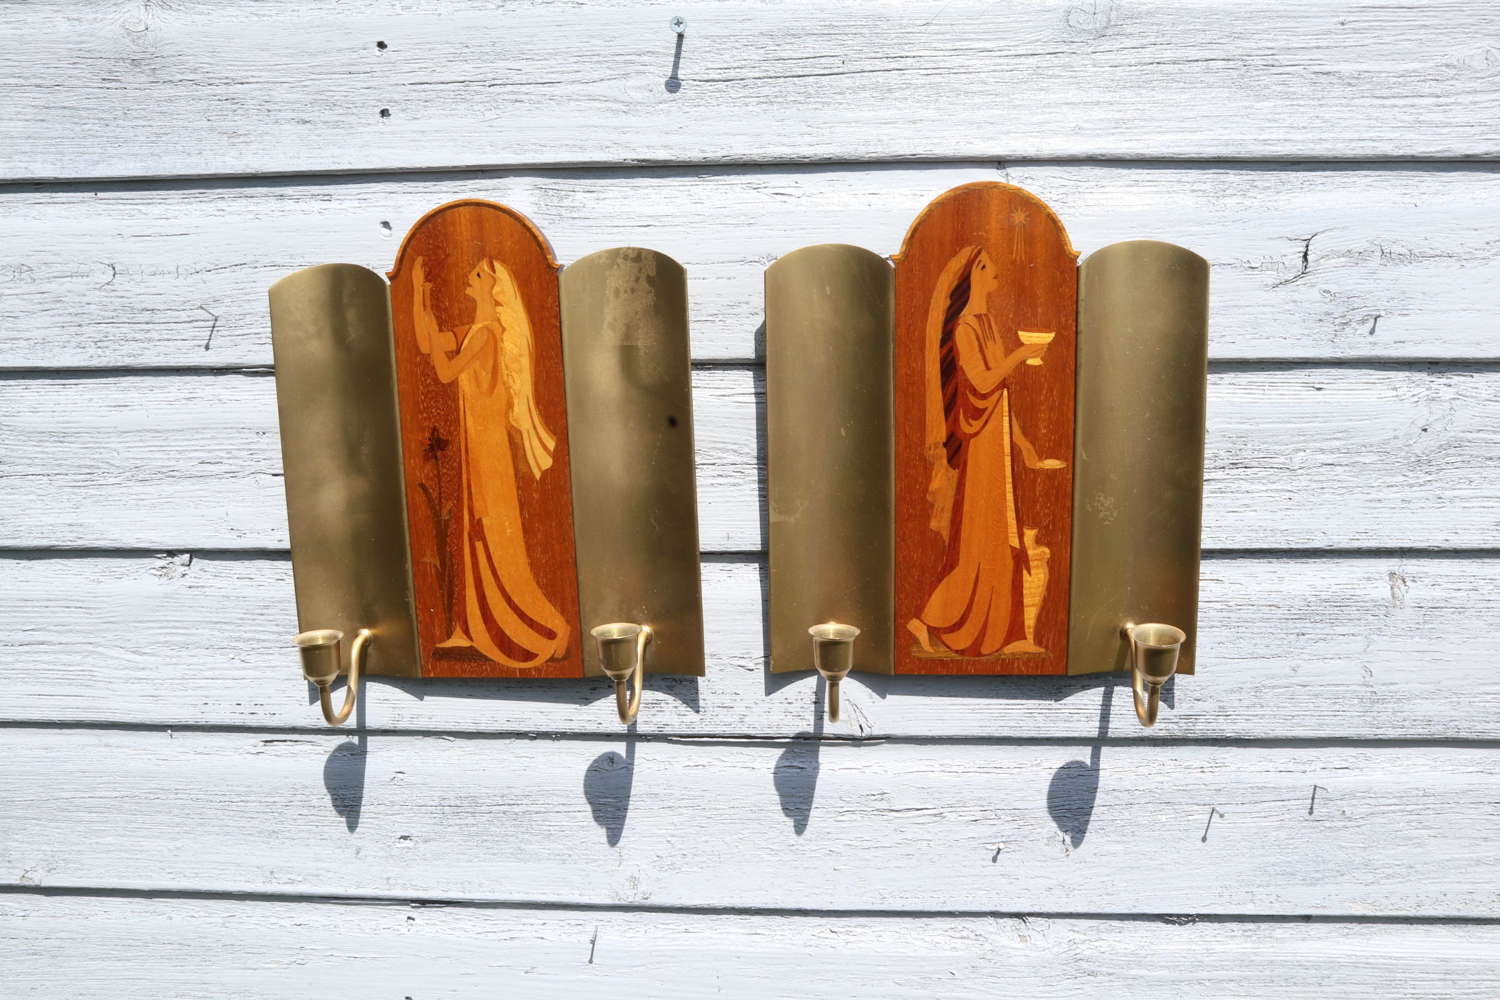 Swedish Art Deco Double Candle Sconces by Mjolby Intarsia c.1930s